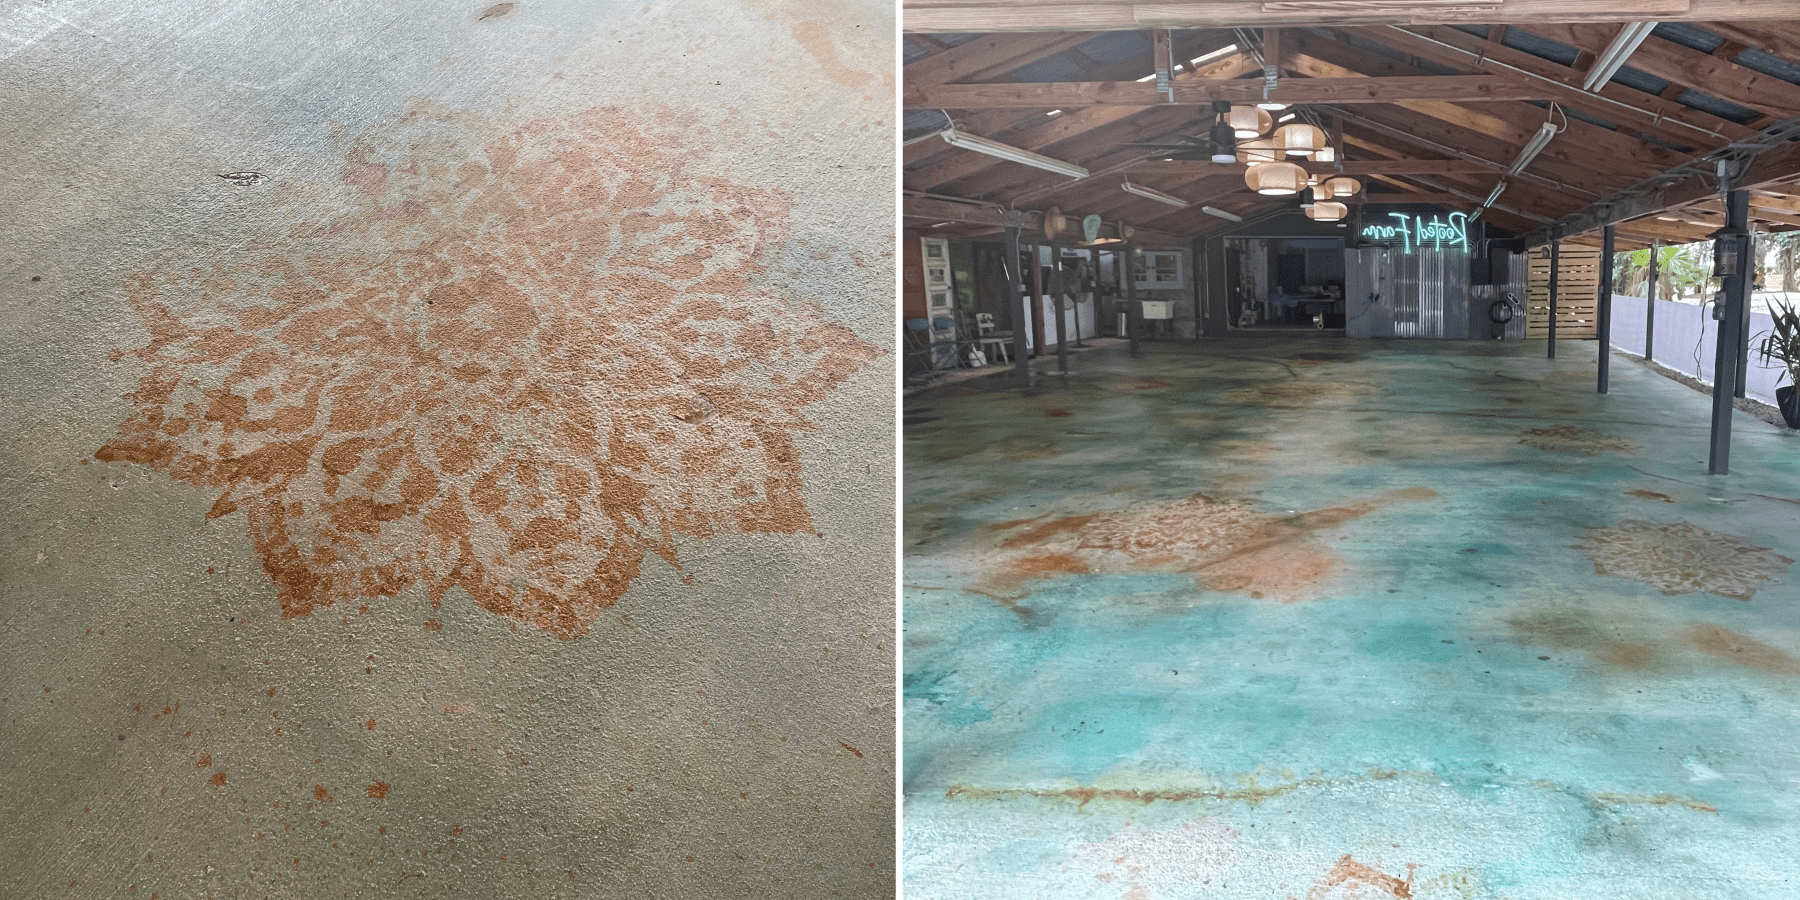 From worn to wow: A DIYer’s journey of floor revival using stencils and acid stains to create a tapestry of patterns on an old concrete floor.